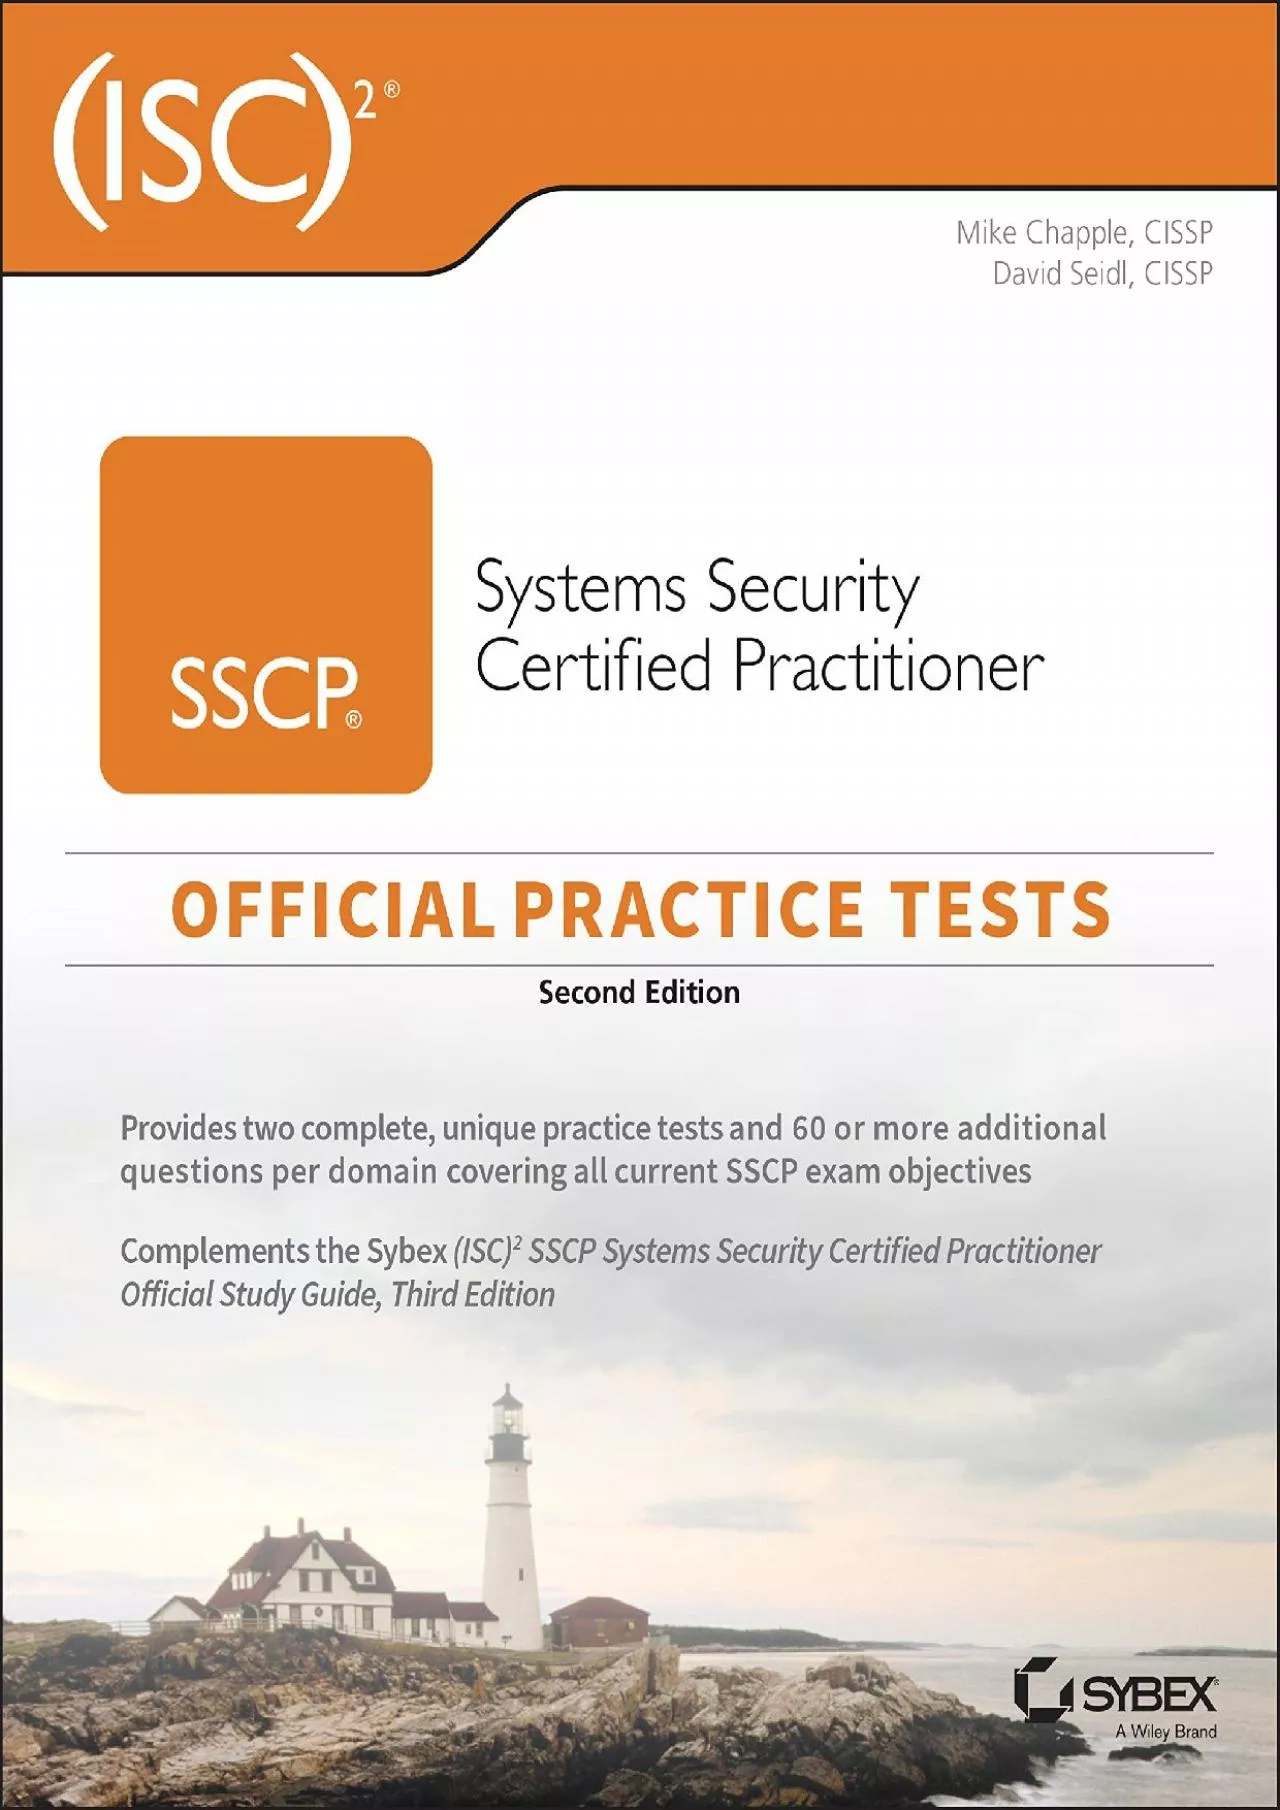 [DOWLOAD]-(ISC)2 SSCP Systems Security Certified Practitioner Official Practice Tests